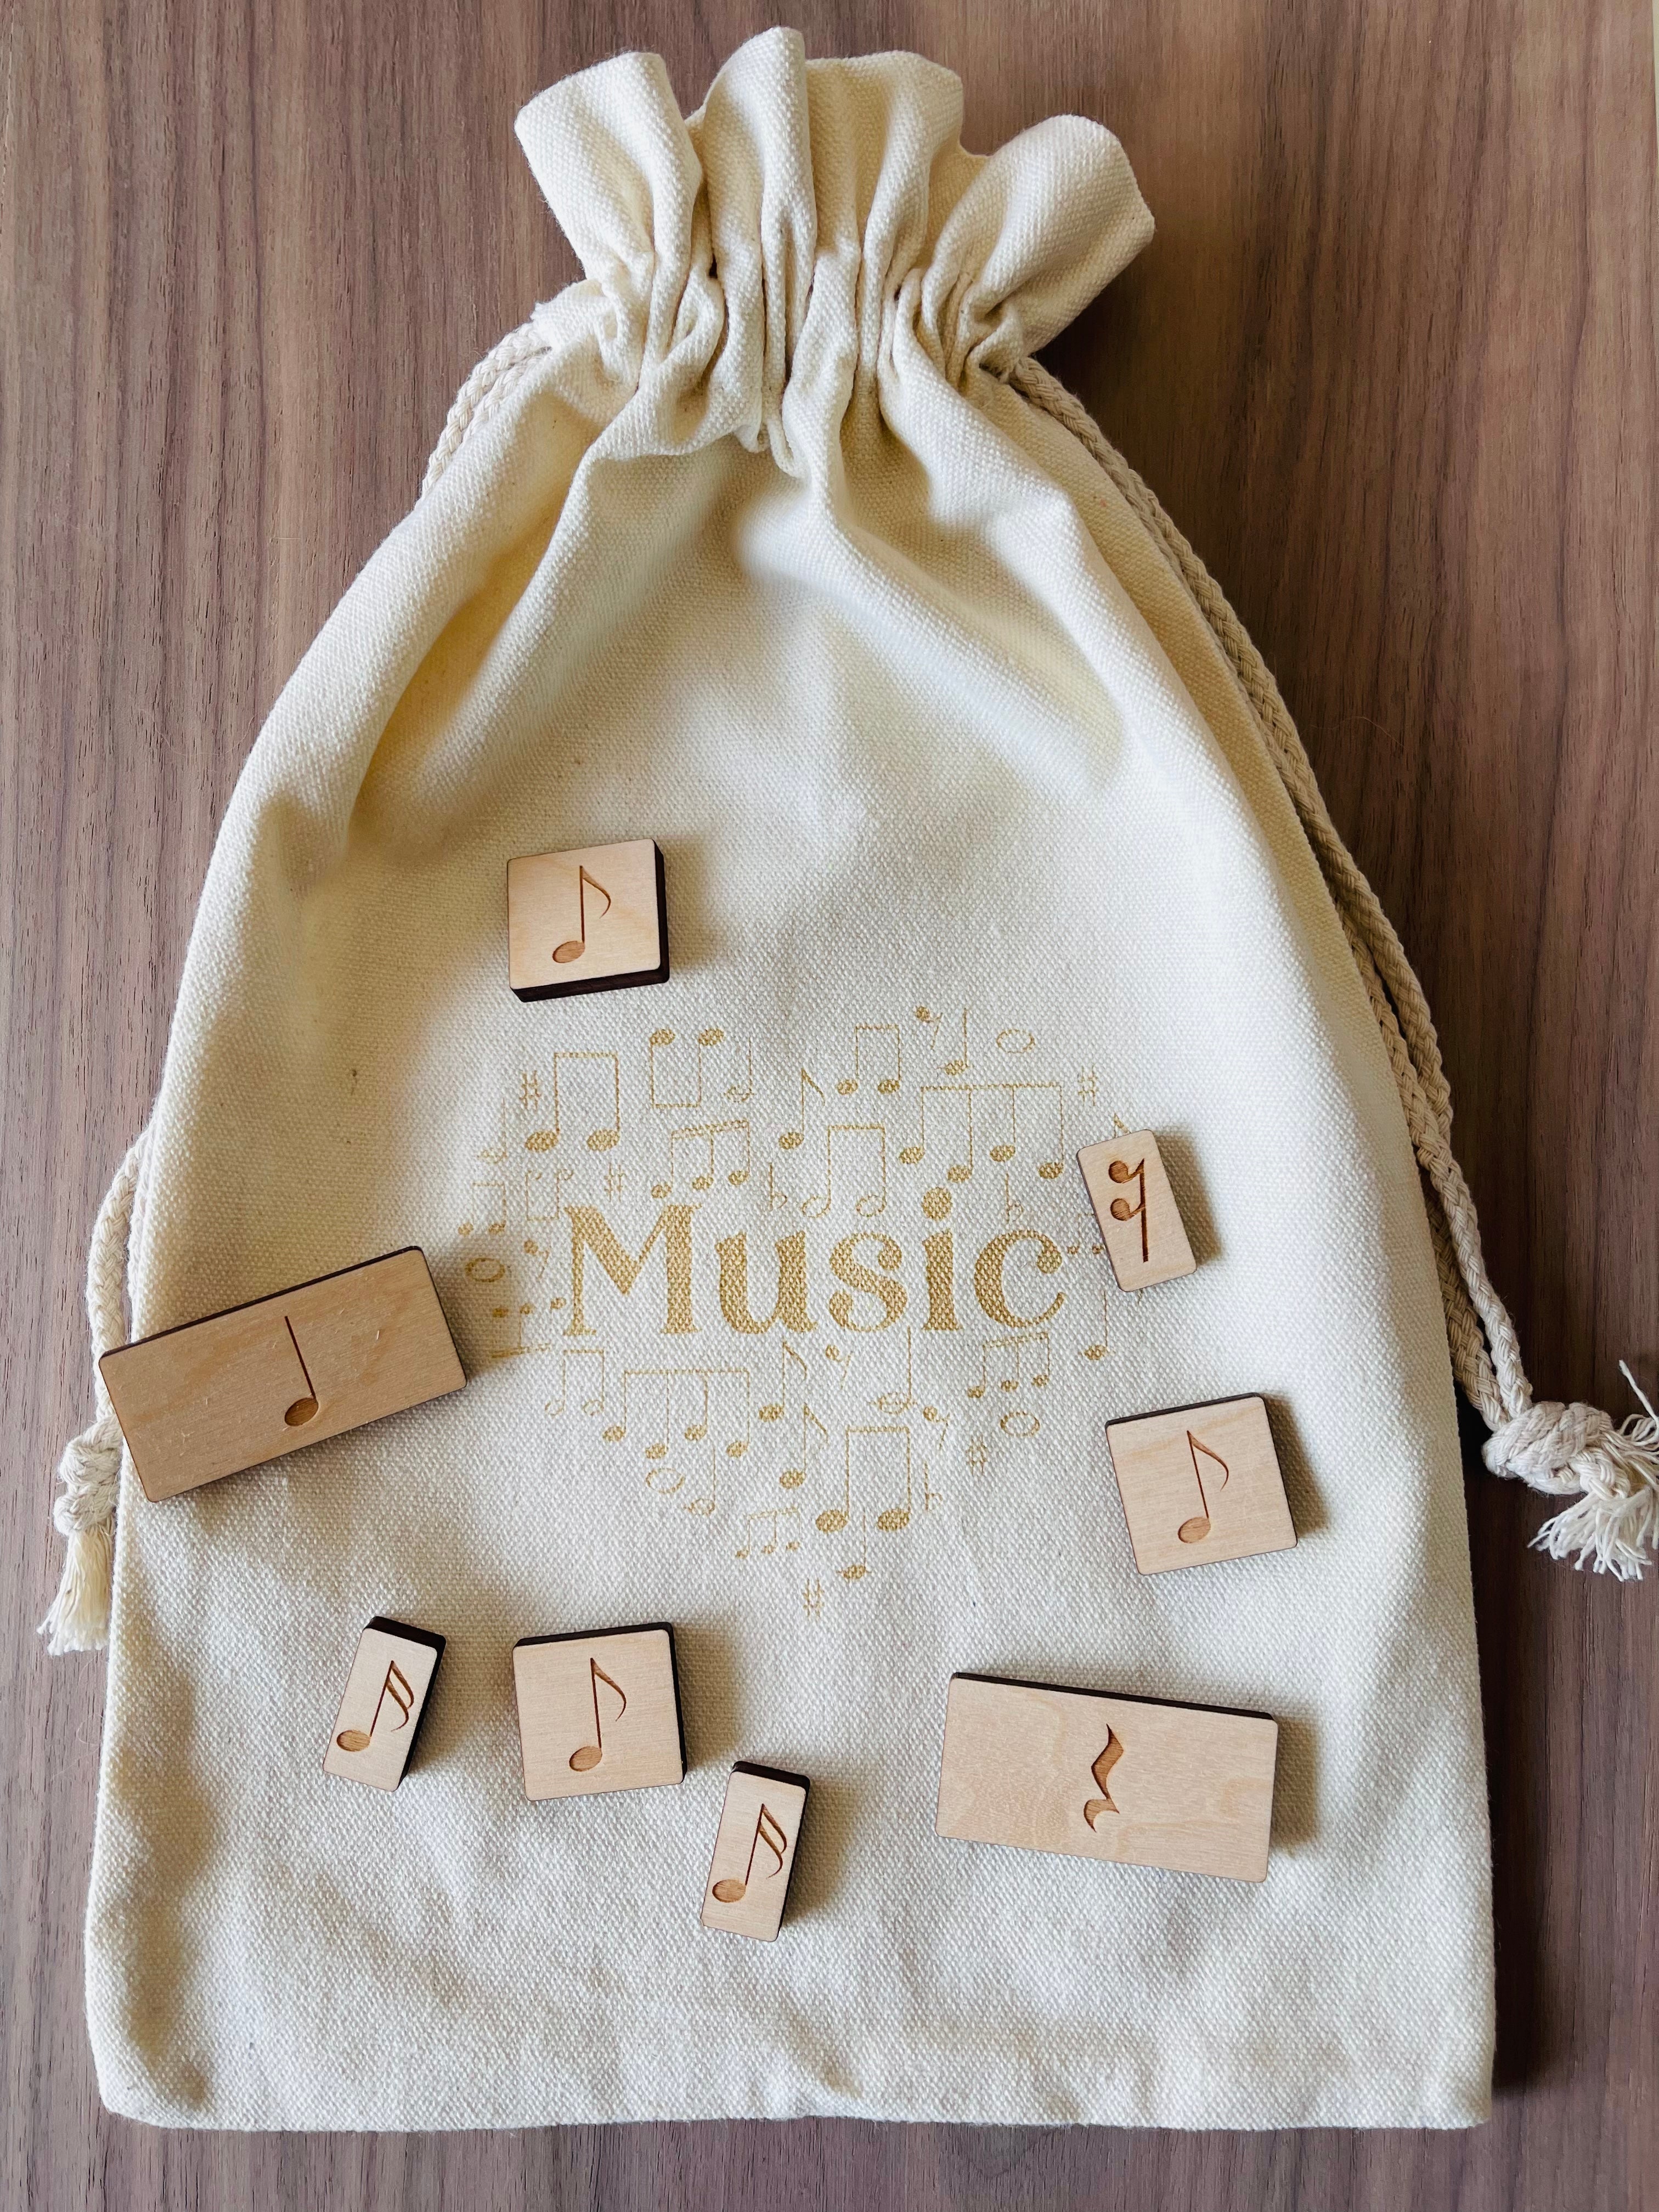 Montessori inspired music notes learning toy | Suzuki piano learning tools - two sided